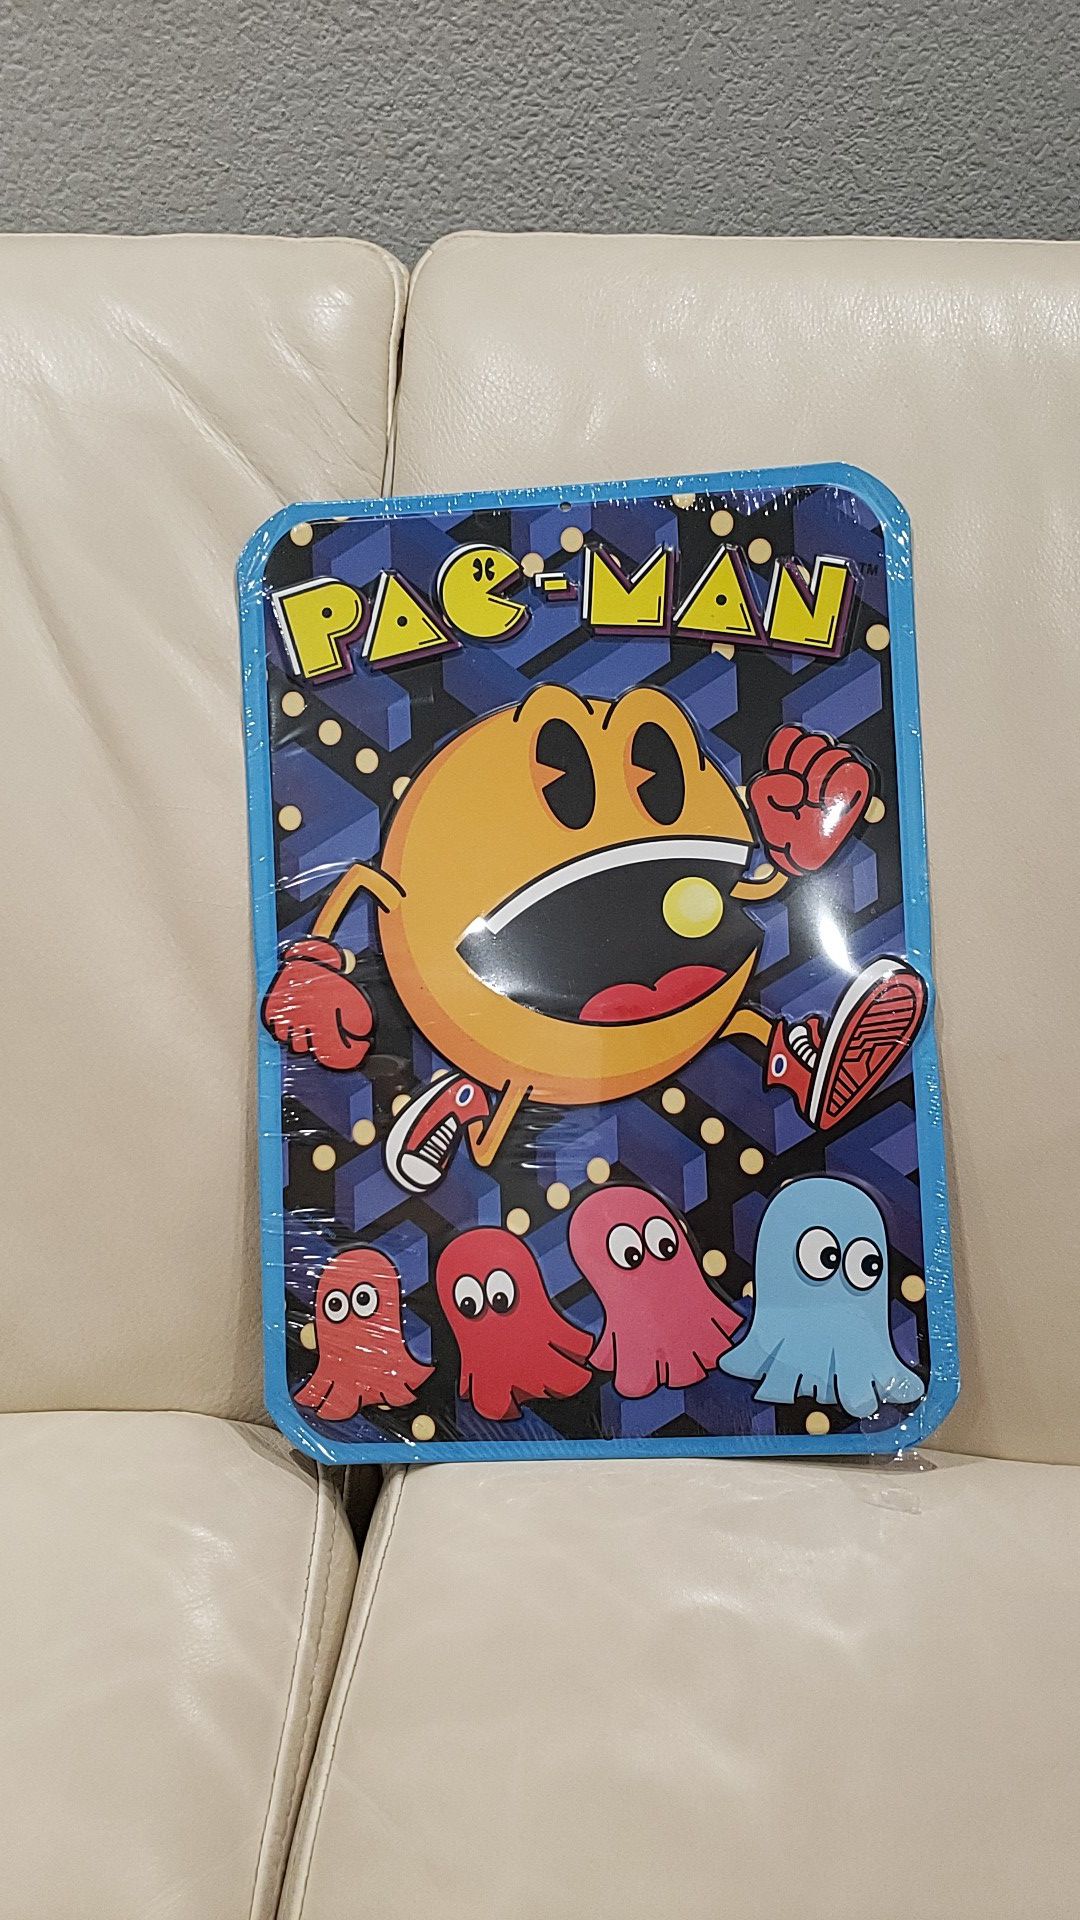 Pacman video game metal door wall sign measures 9x13" embossed metal brand new with hole at the top for easy hanging